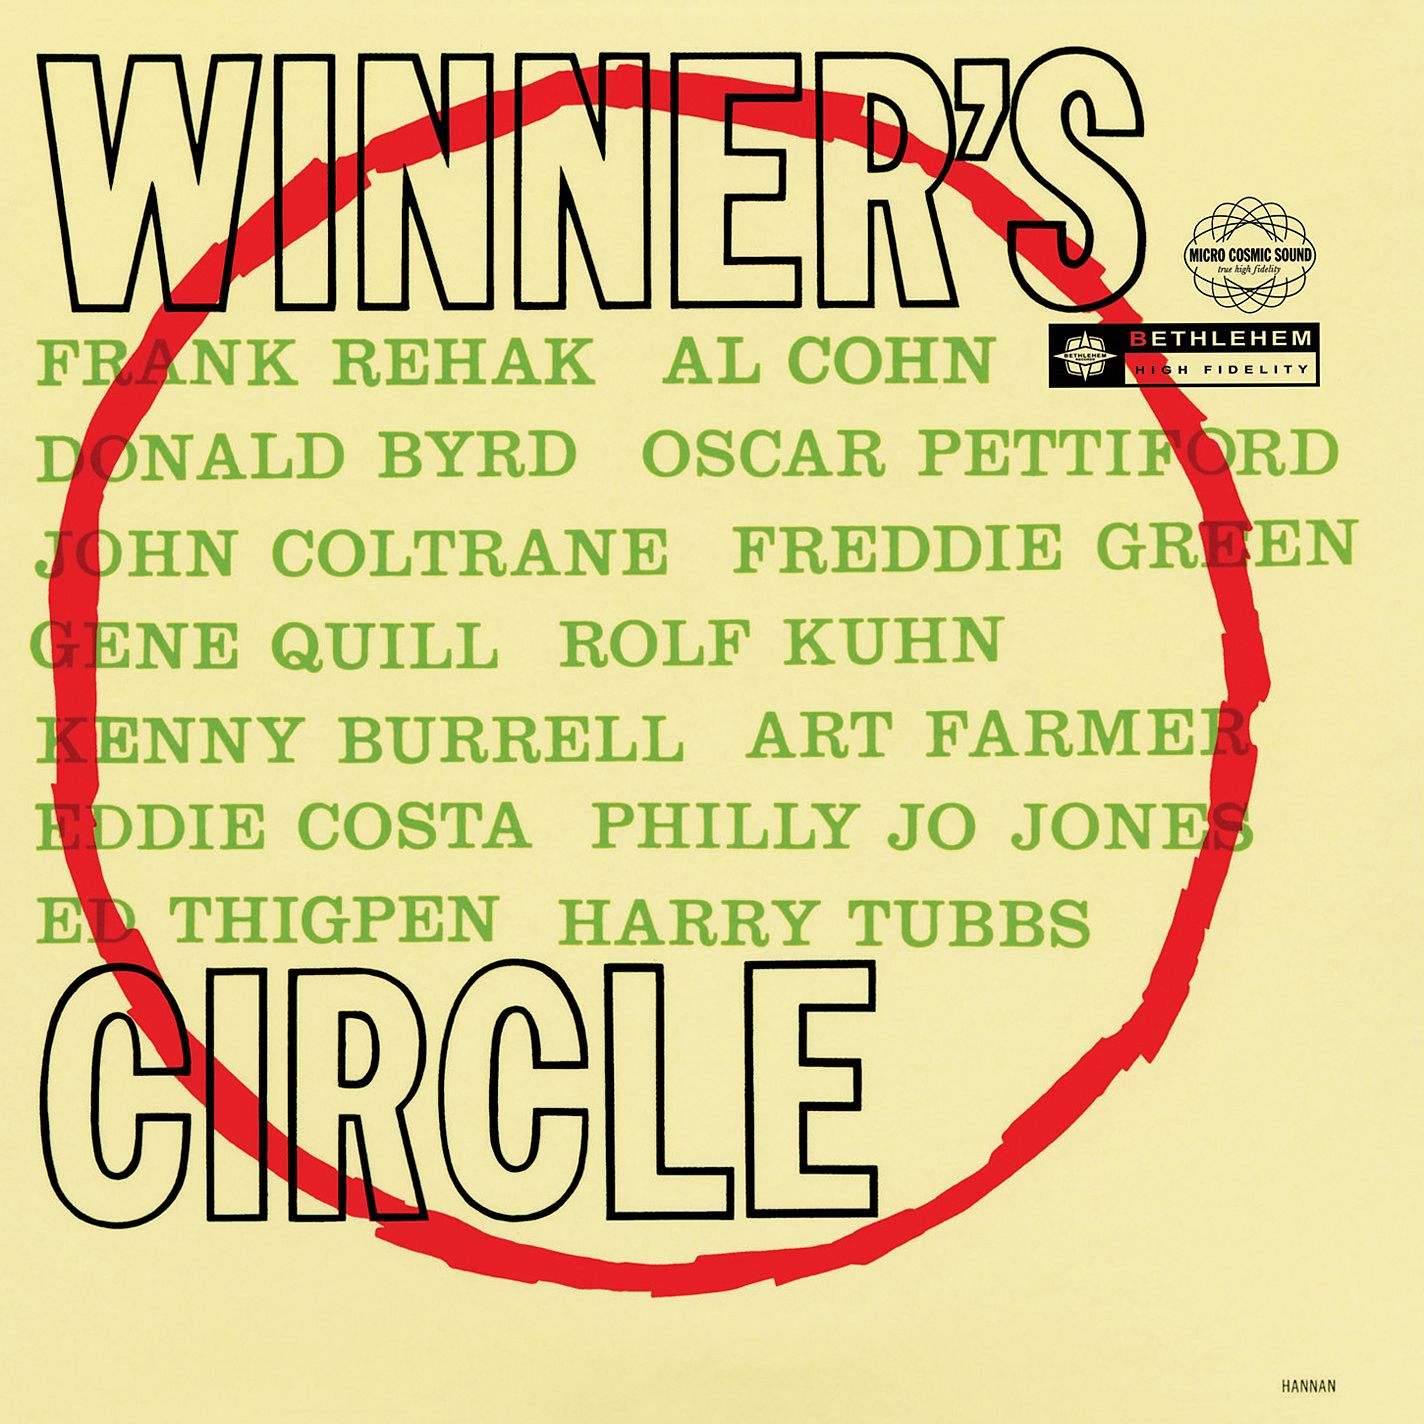 Various Artists - In The Winner’s Circle (1958/2013) [PrestoClassical FLAC 24bit/96kHz]